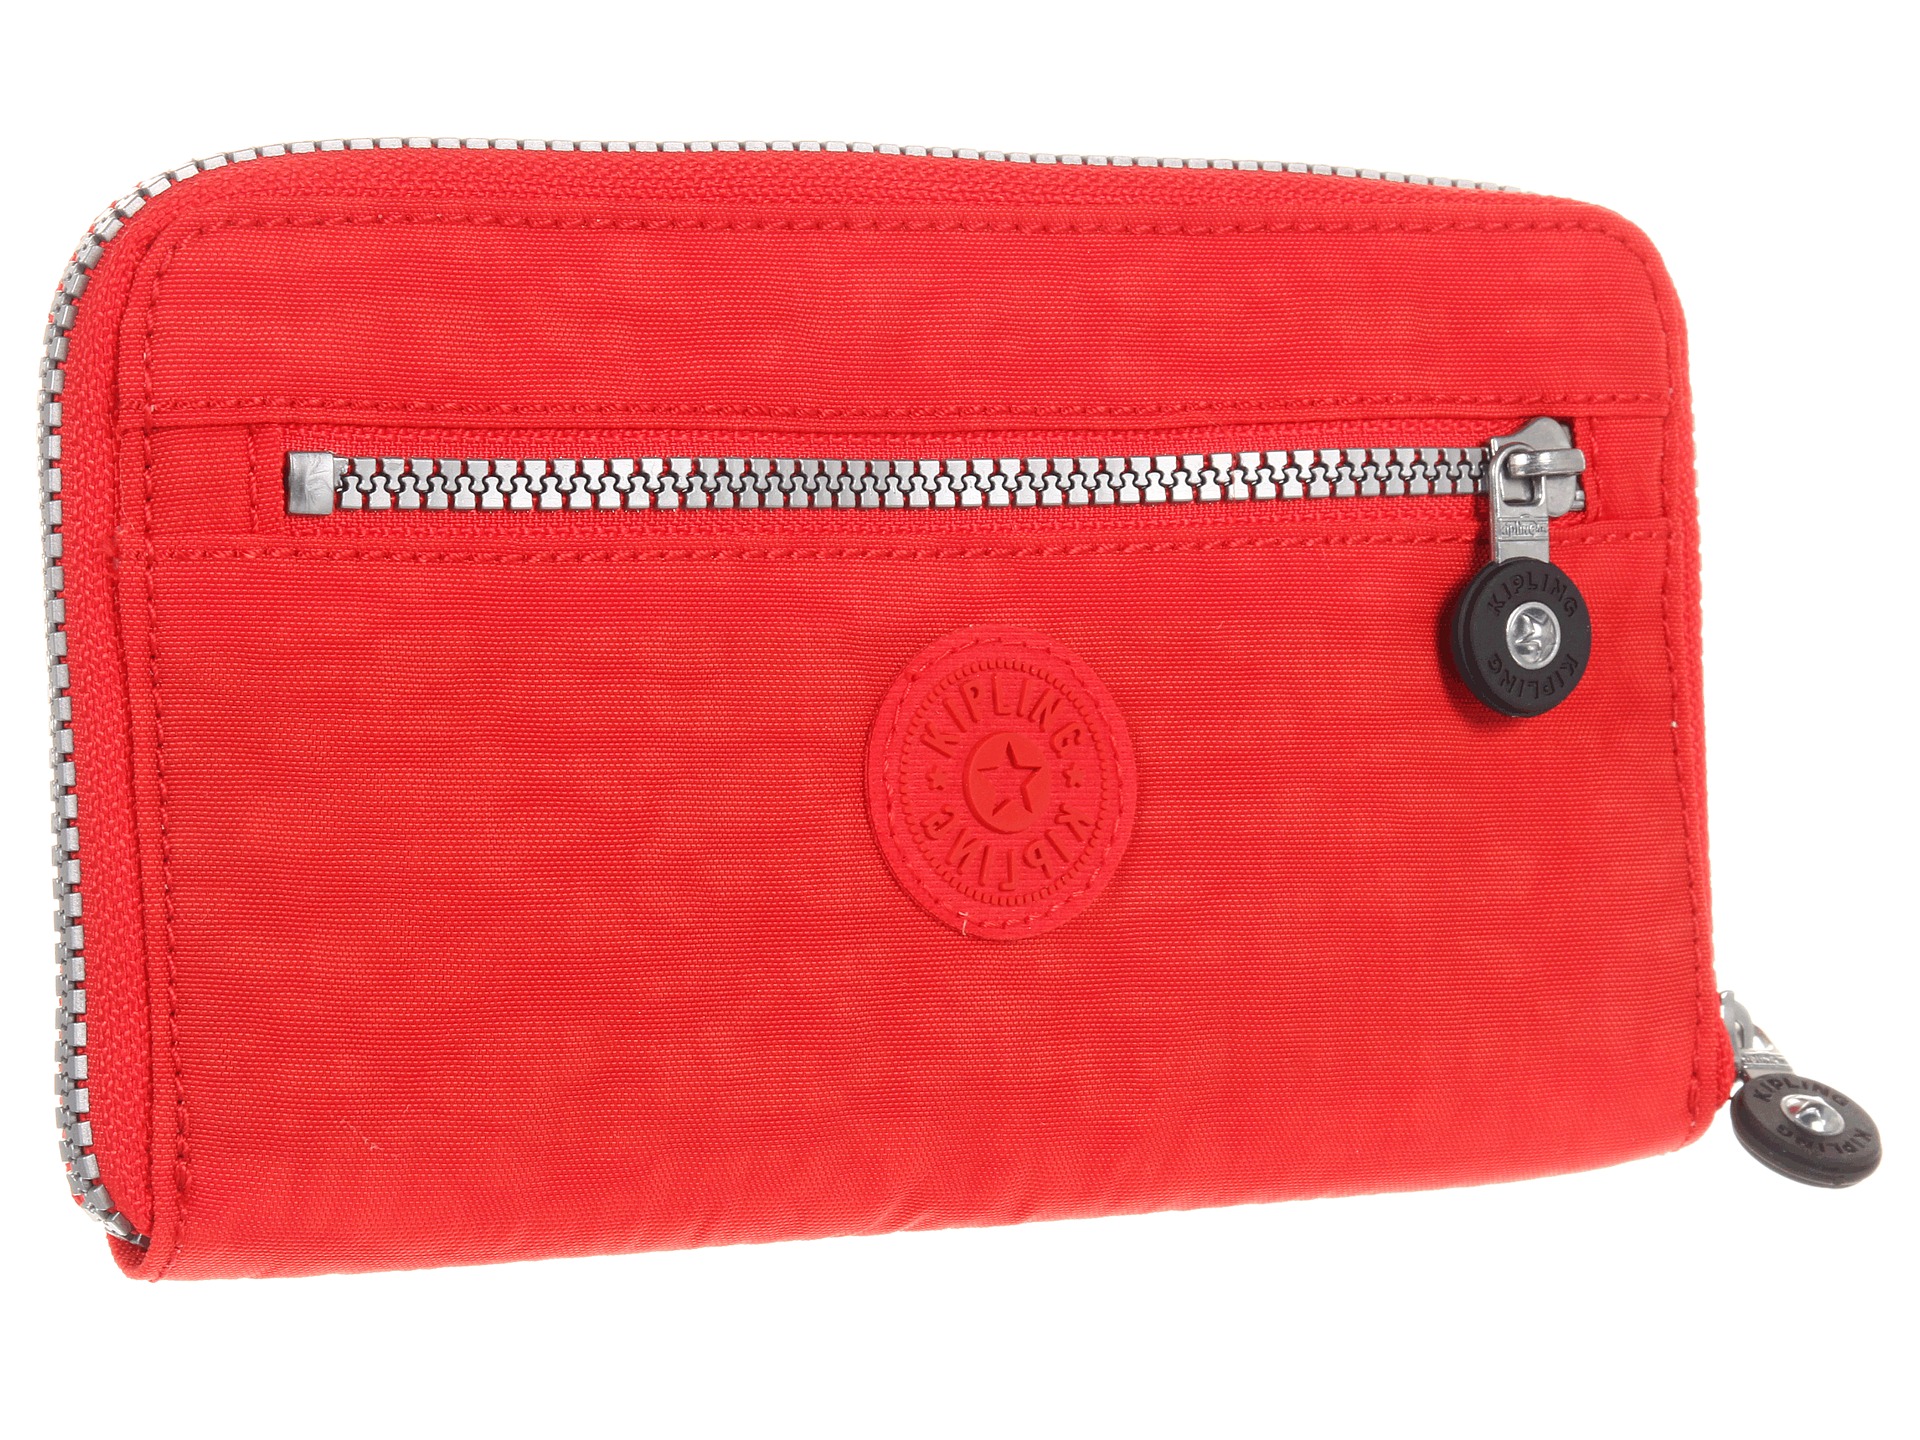   raffie wallet from kipling u s a is ready to store all of your daily